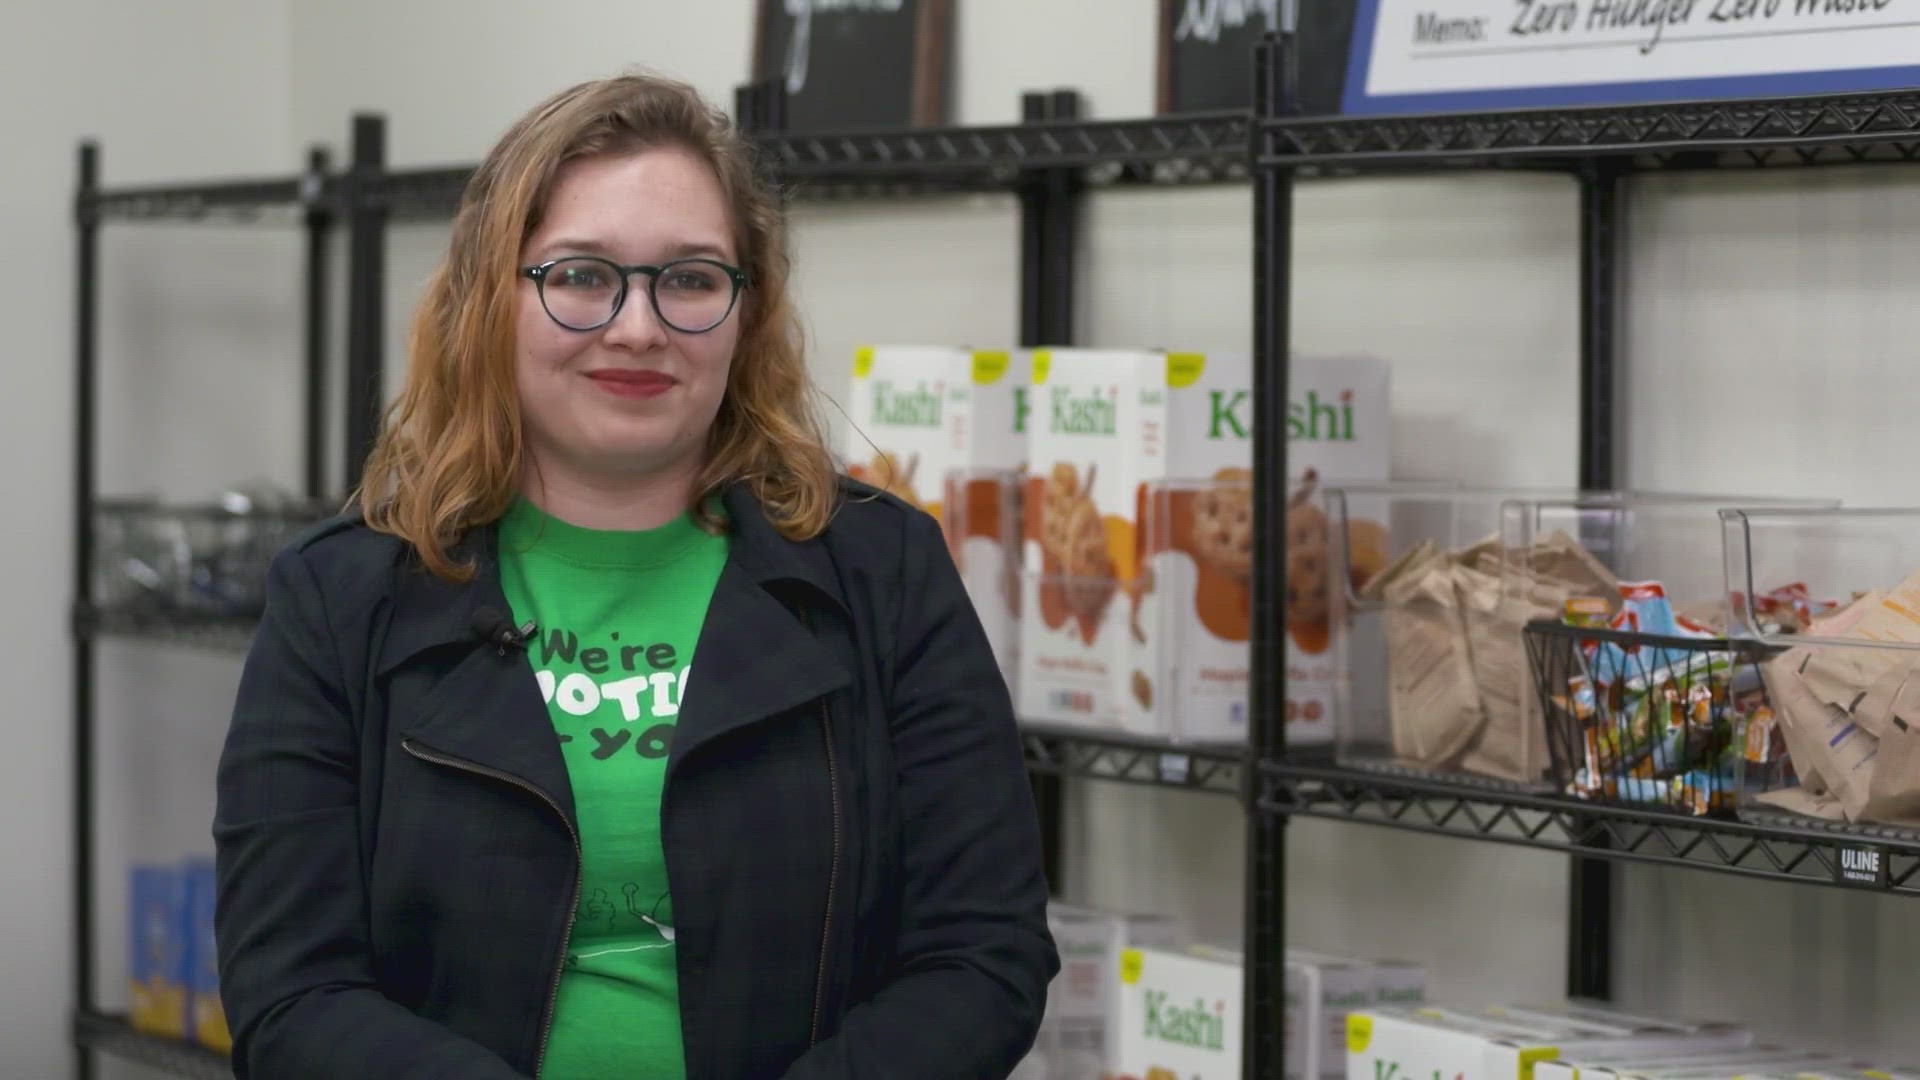 "So, in many circumstances, I've used the food pantry," Moore said. "The most common reason for me, and other people, is insufficient funds [to pay for food]."